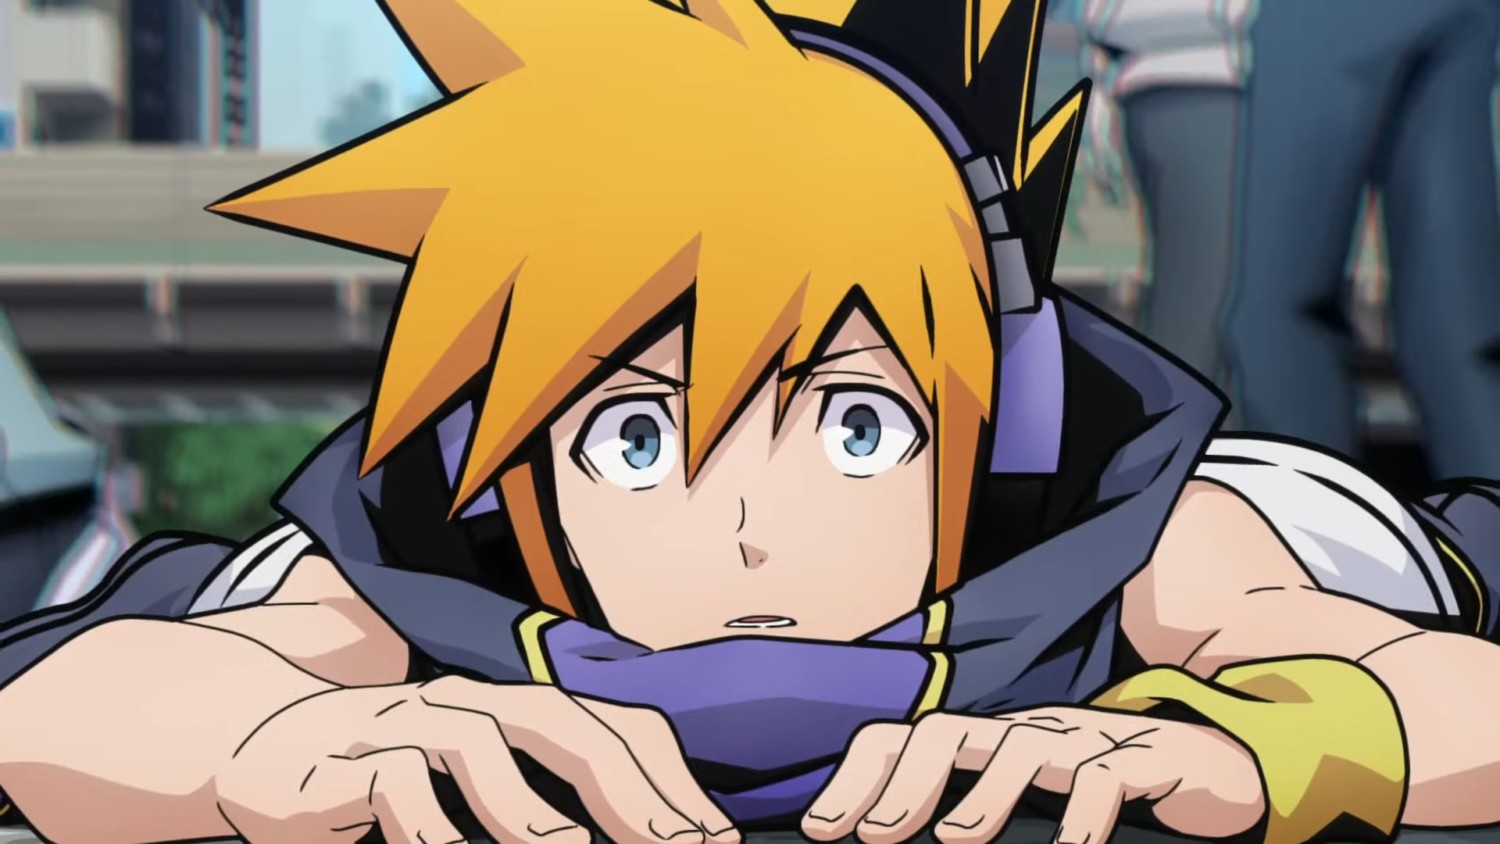 Funimation to Stream The World Ends With You Anime - News - Anime News  Network